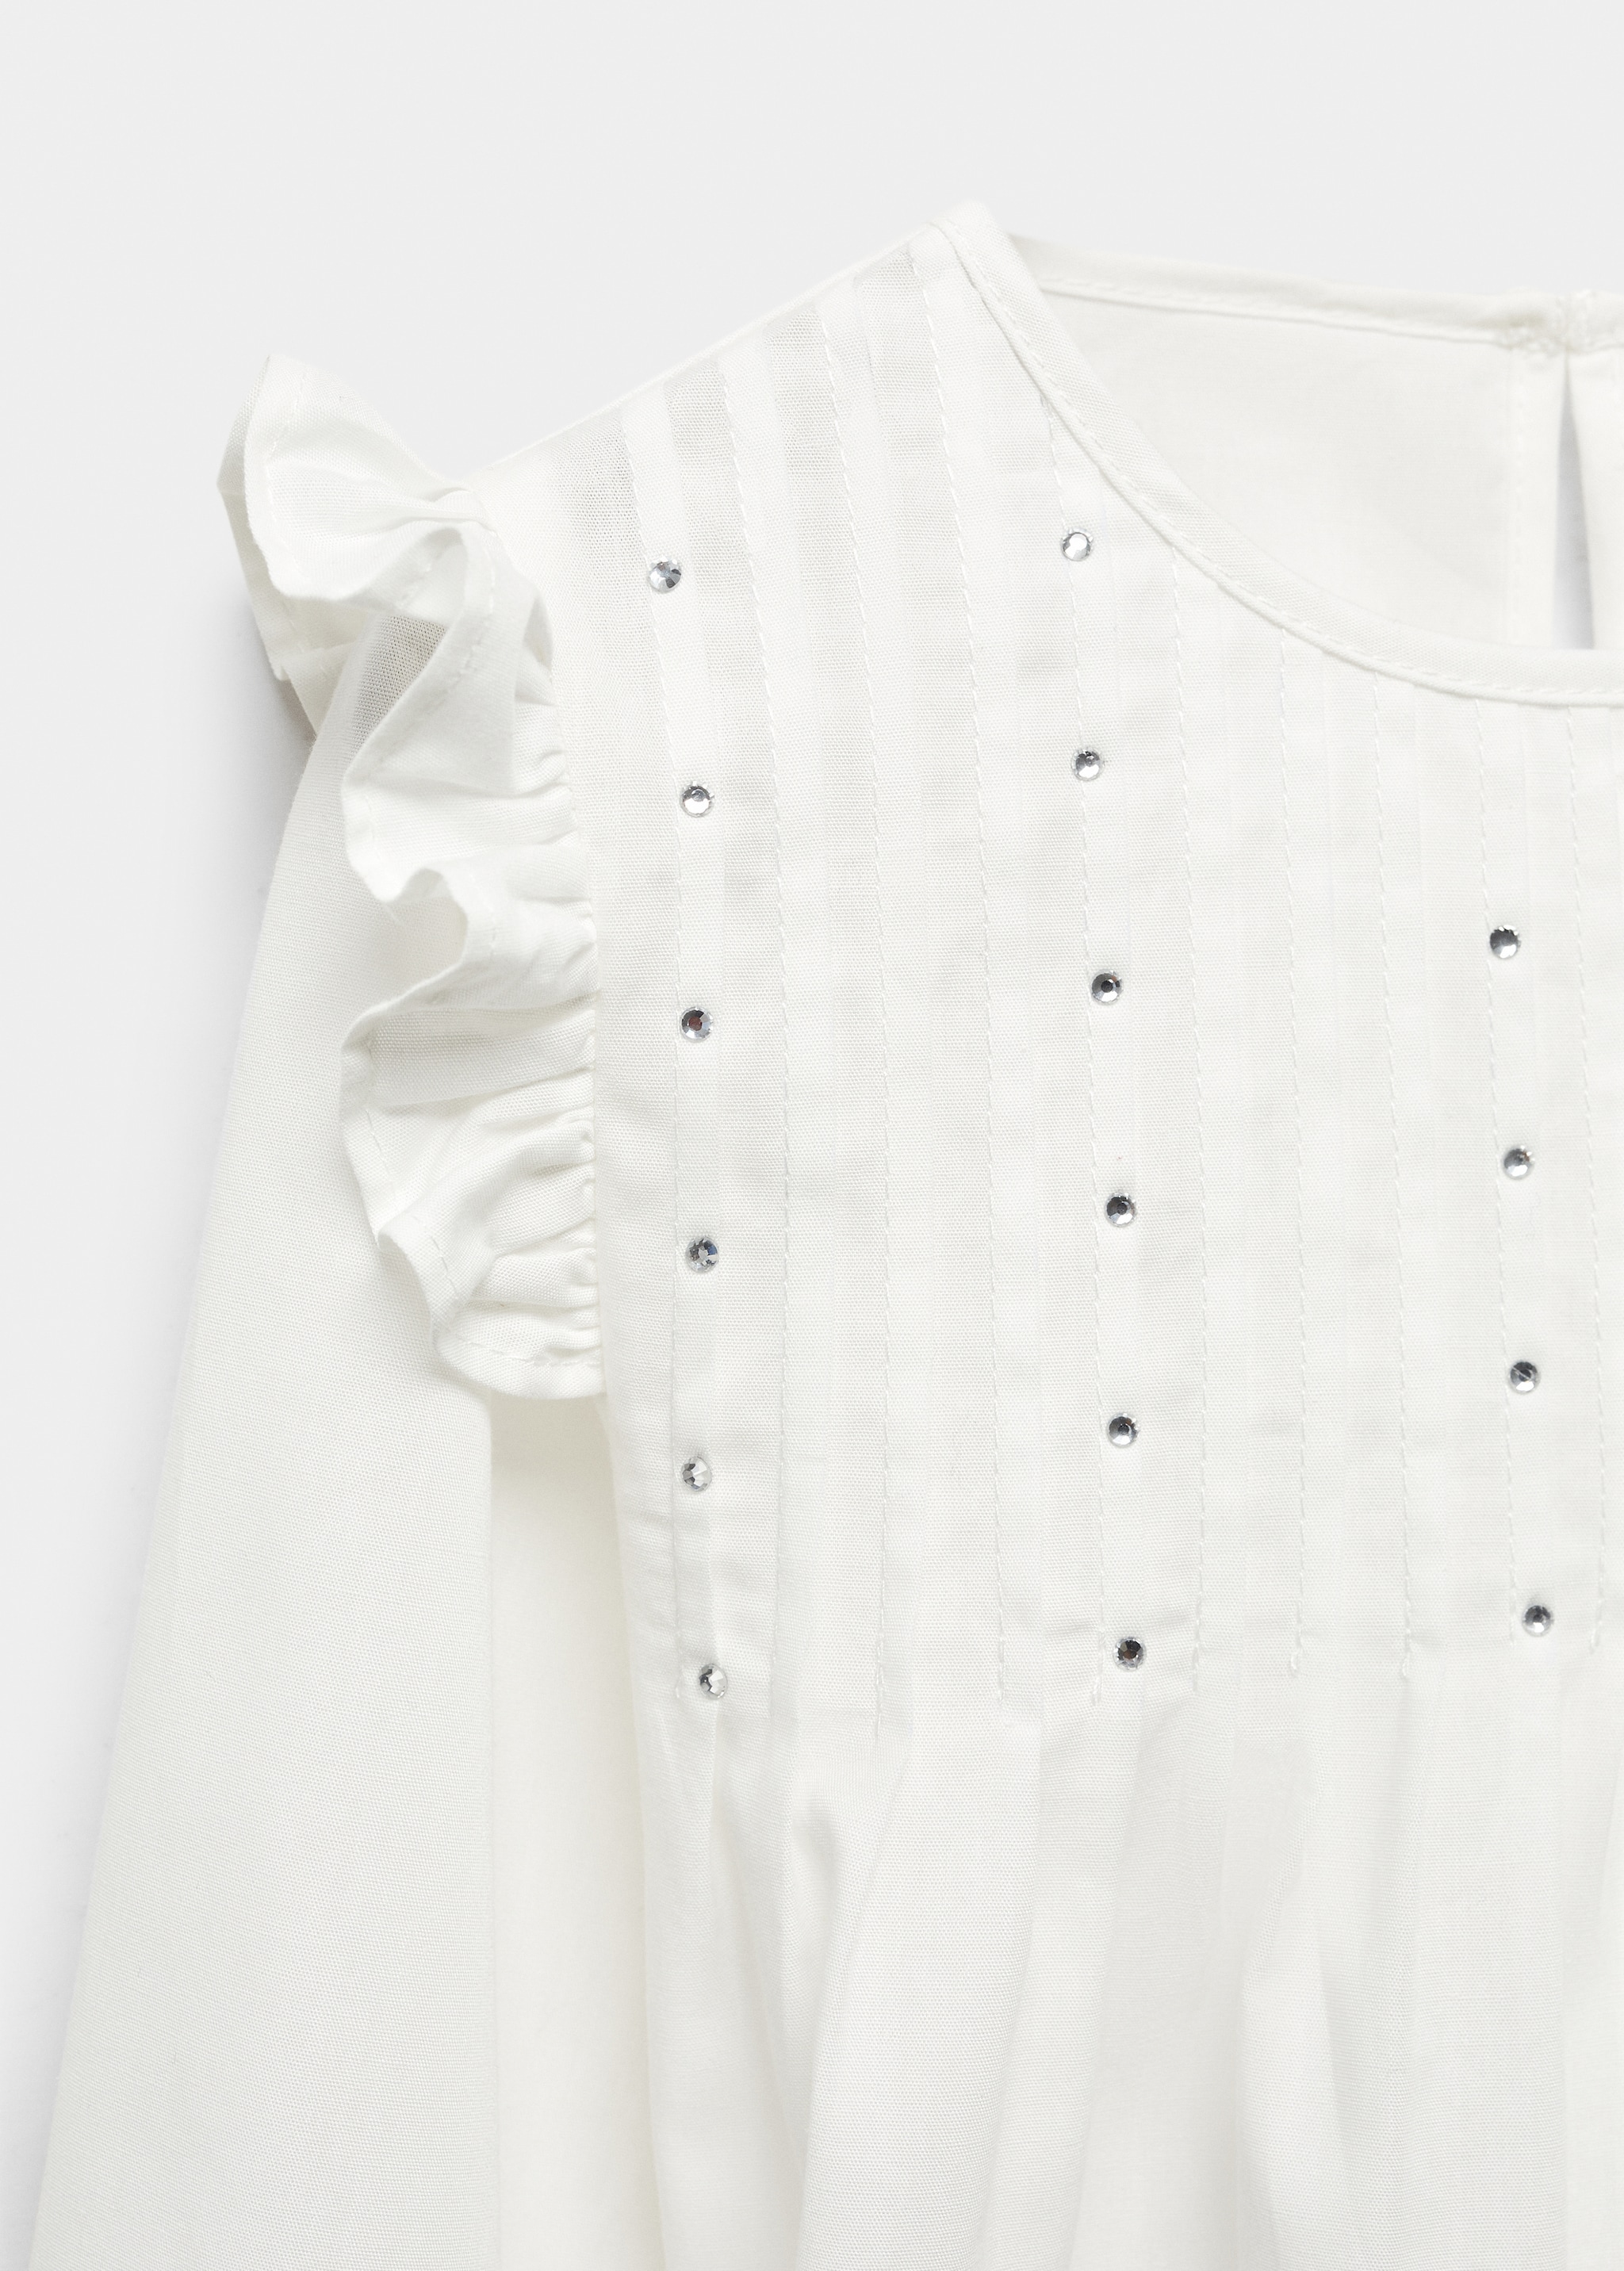 Ruffled cotton blouse - Details of the article 8